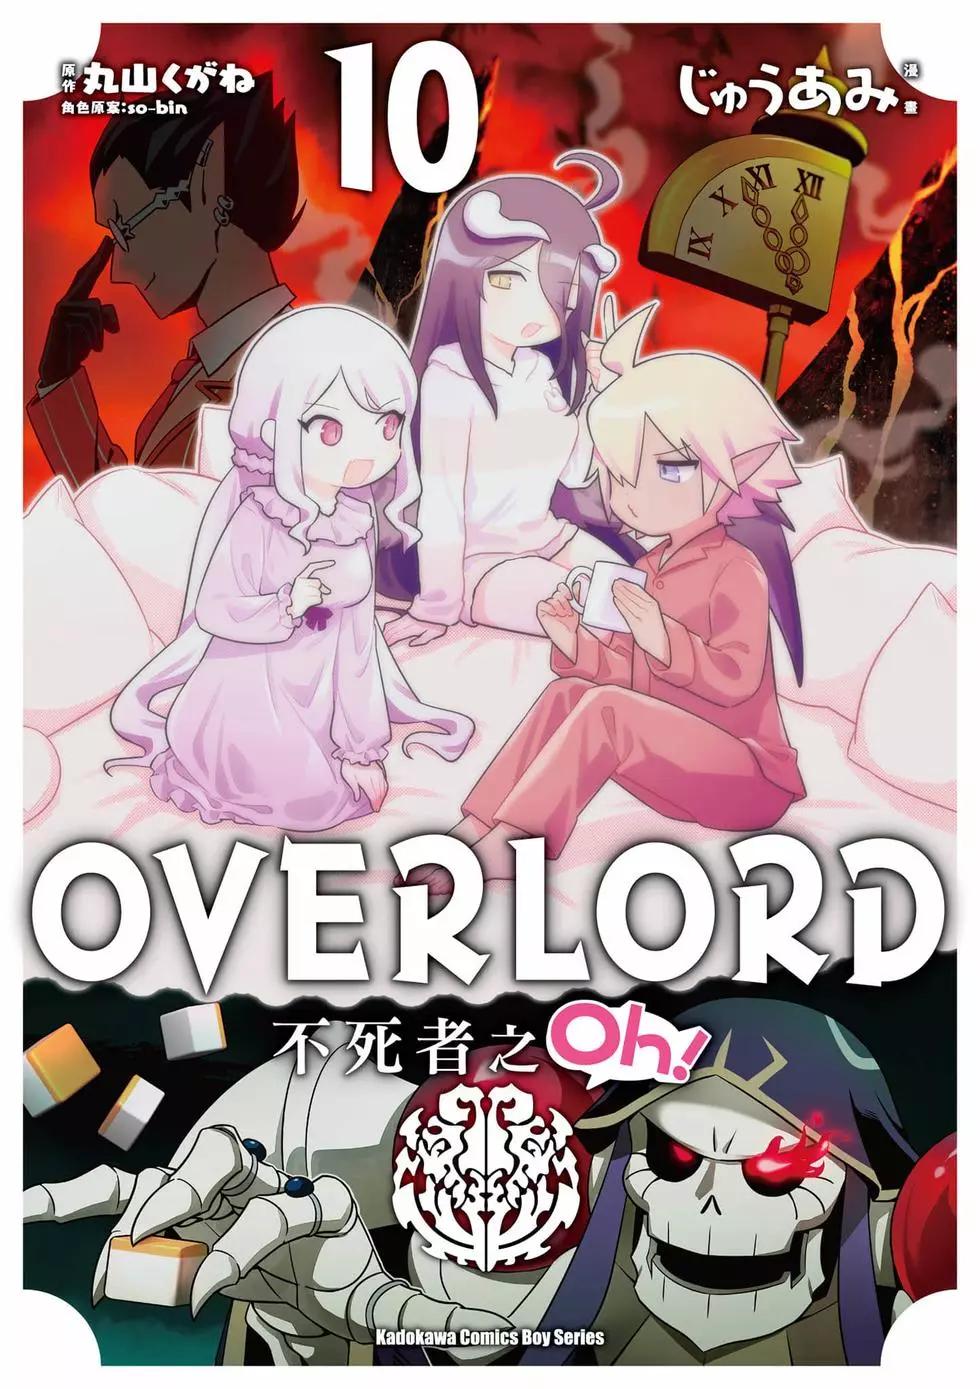 Overlord不死者之OH！ - 第10卷(1/3) - 1